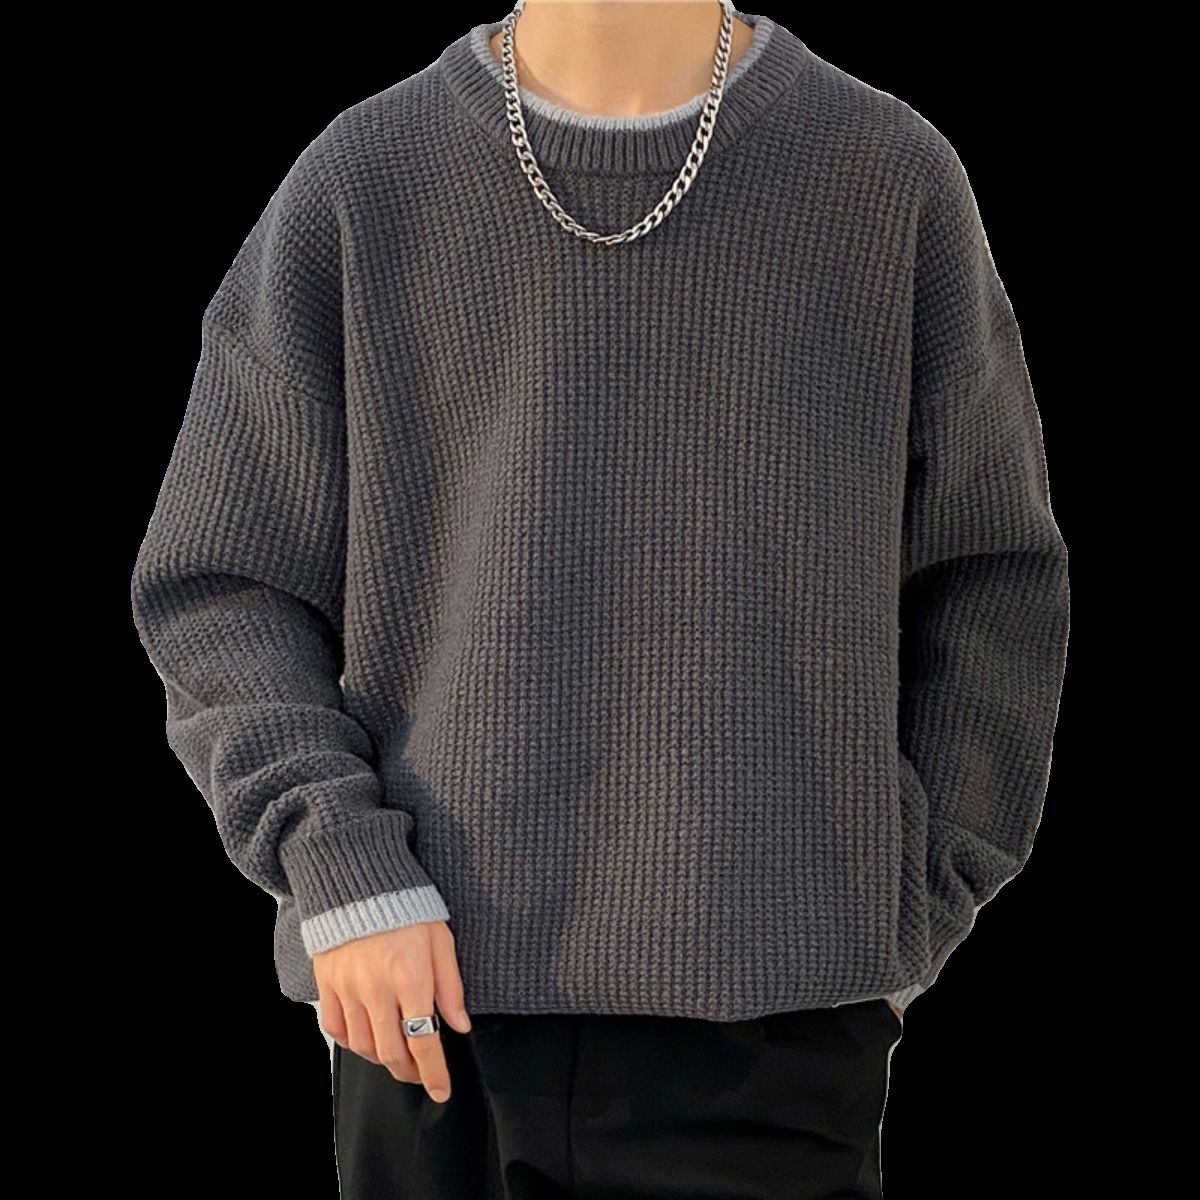 Fake two-piece sweater for men in autumn and winter thickened pullover sweater for teenagers loose American trend inner sweater